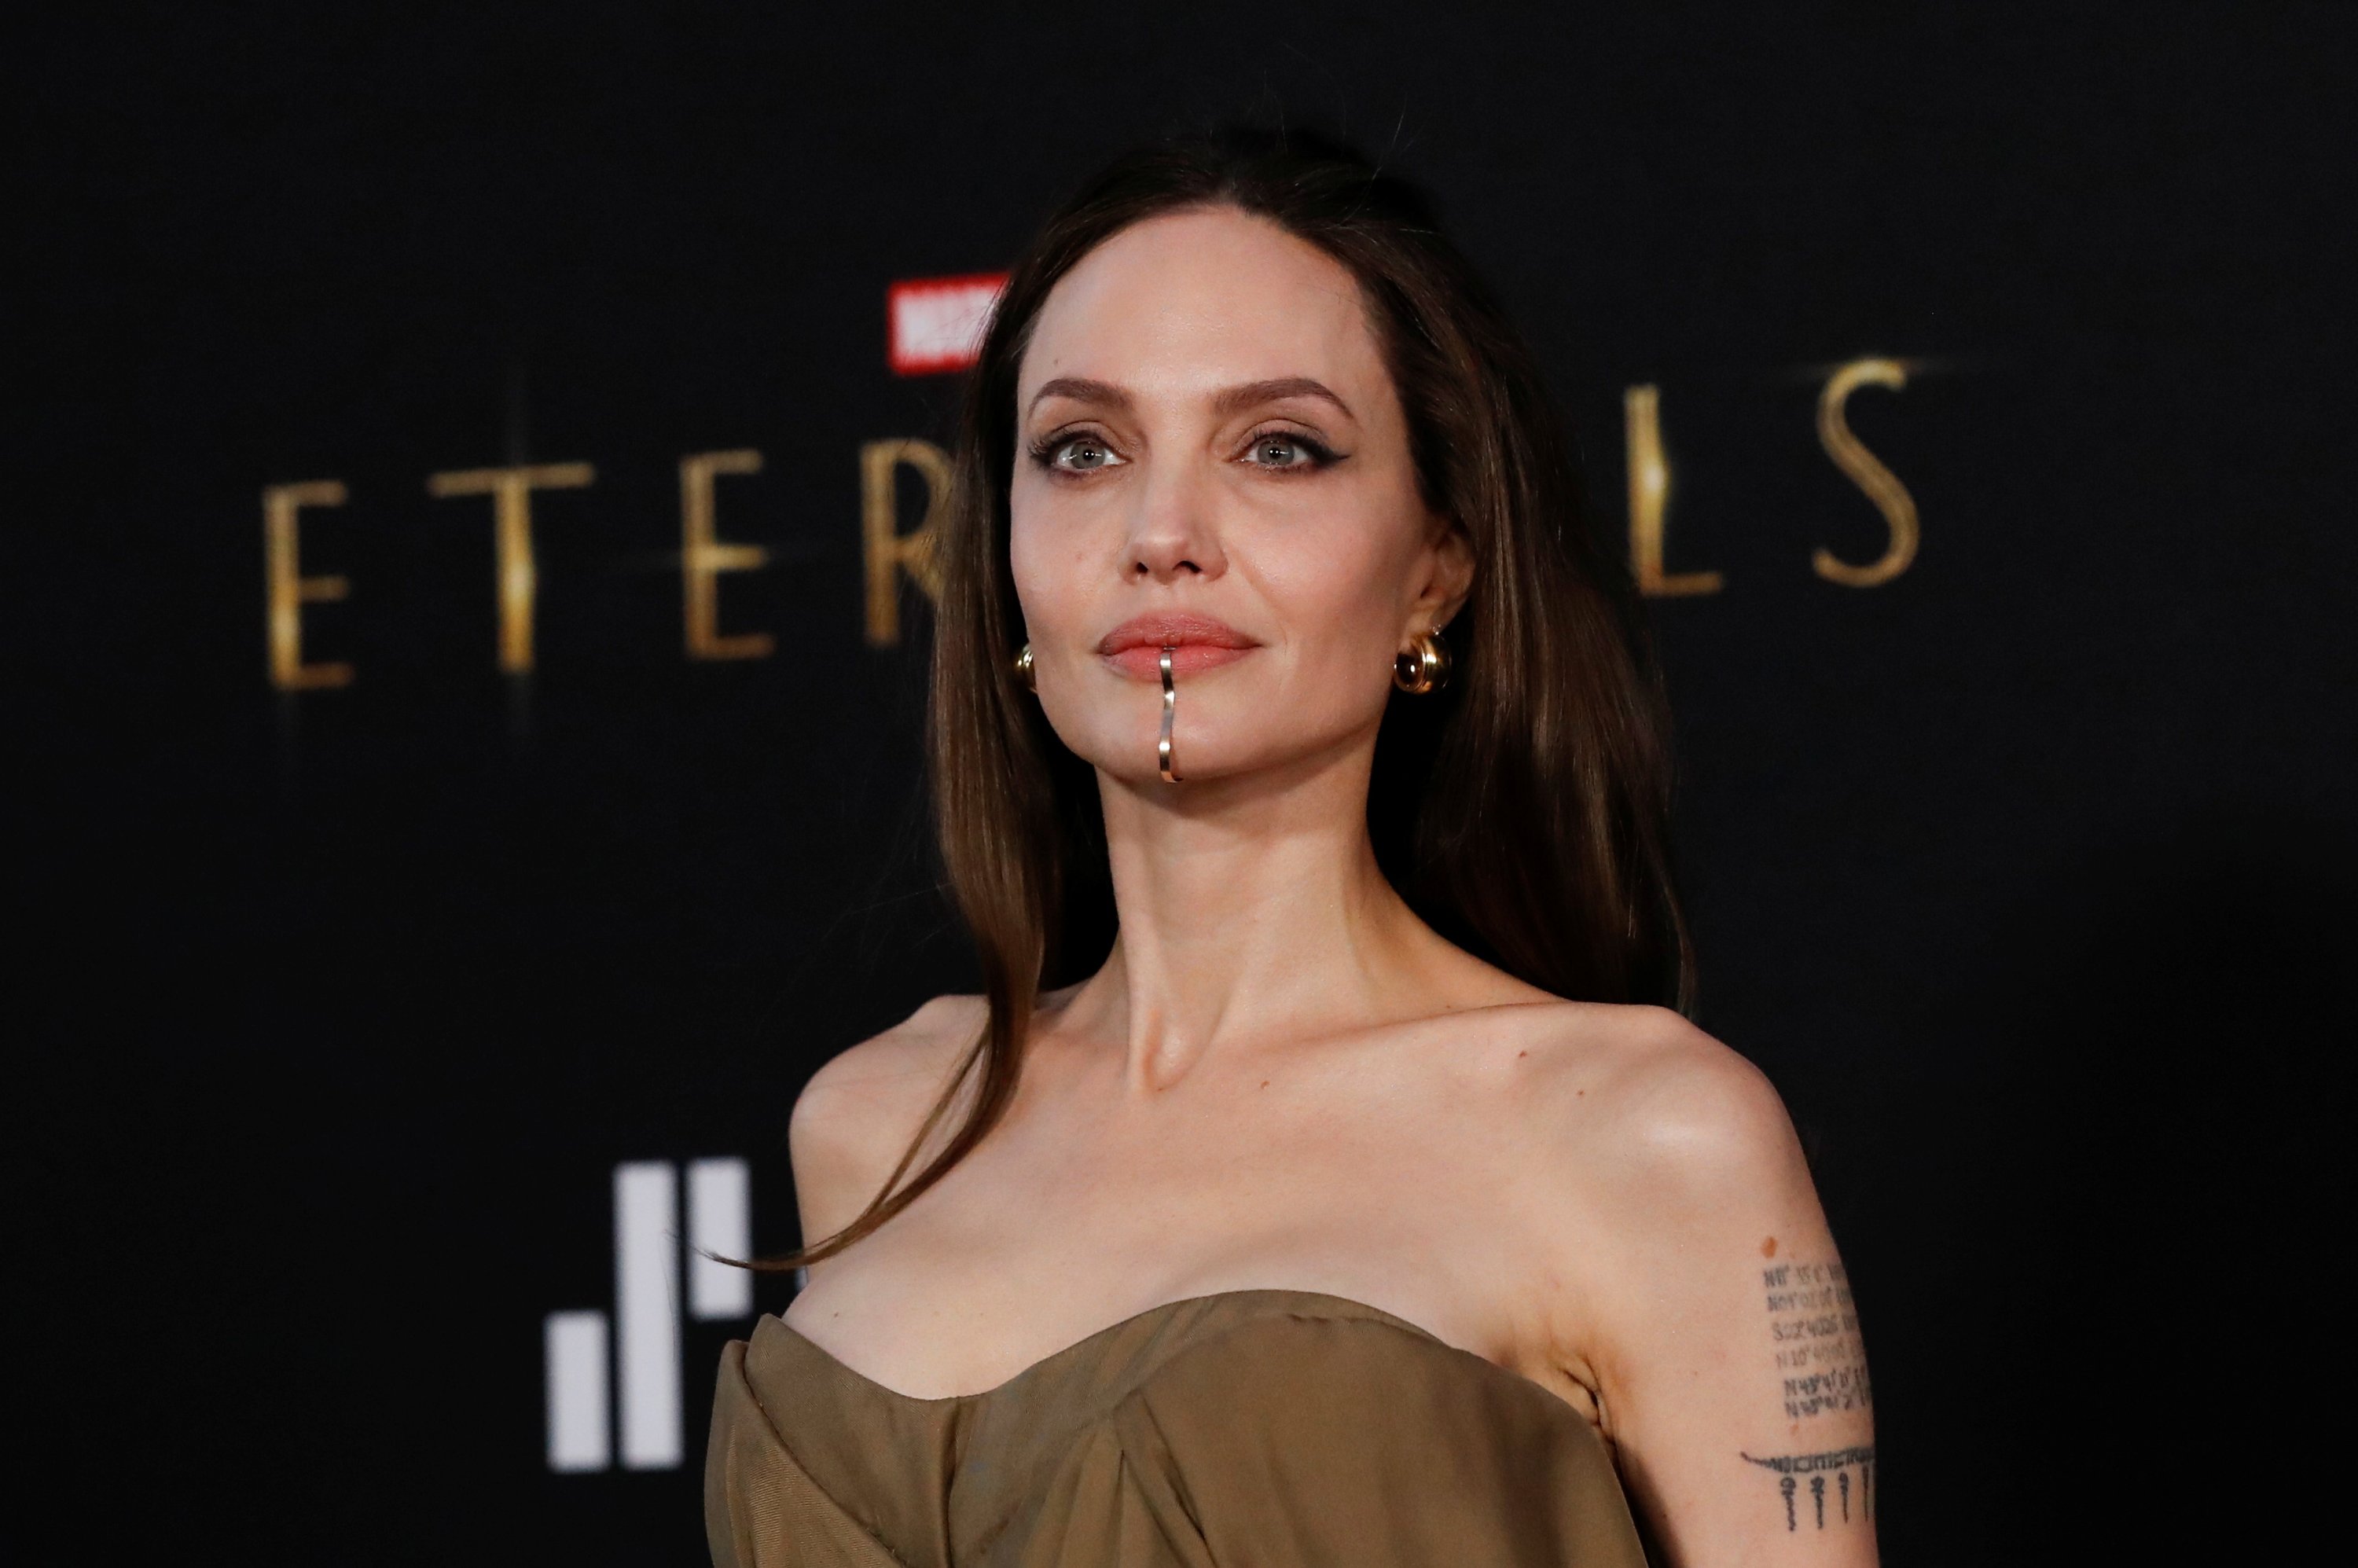 Cast member Angelina Jolie poses at the premiere for the film 'Eternals' in Los Angeles, California, U.S., Oct. 18, 2021. (Reuters Photo)